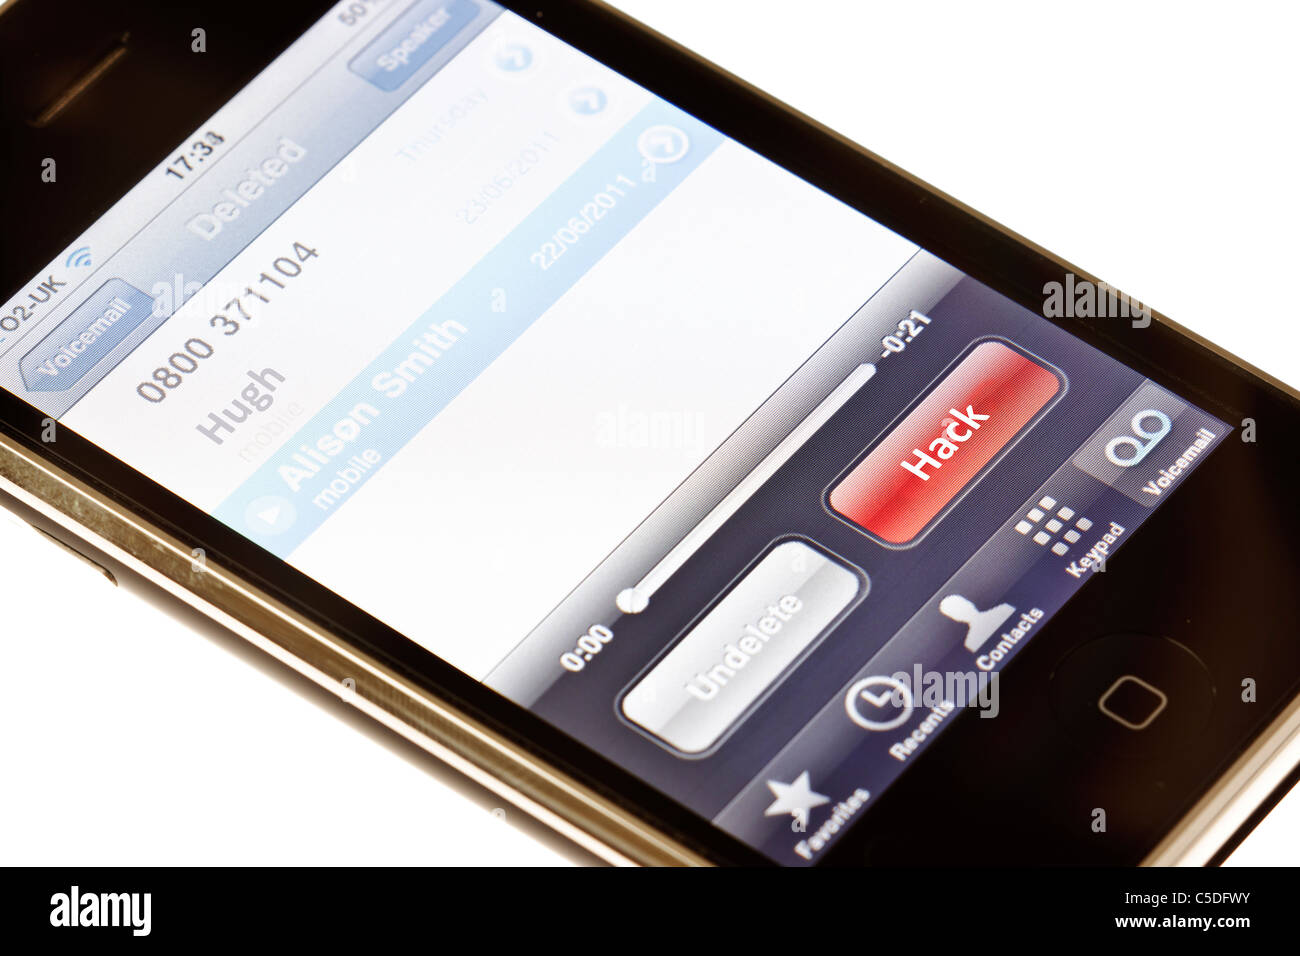 Mobile phone accessing voicemail with a button marked 'Hack' Stock Photo